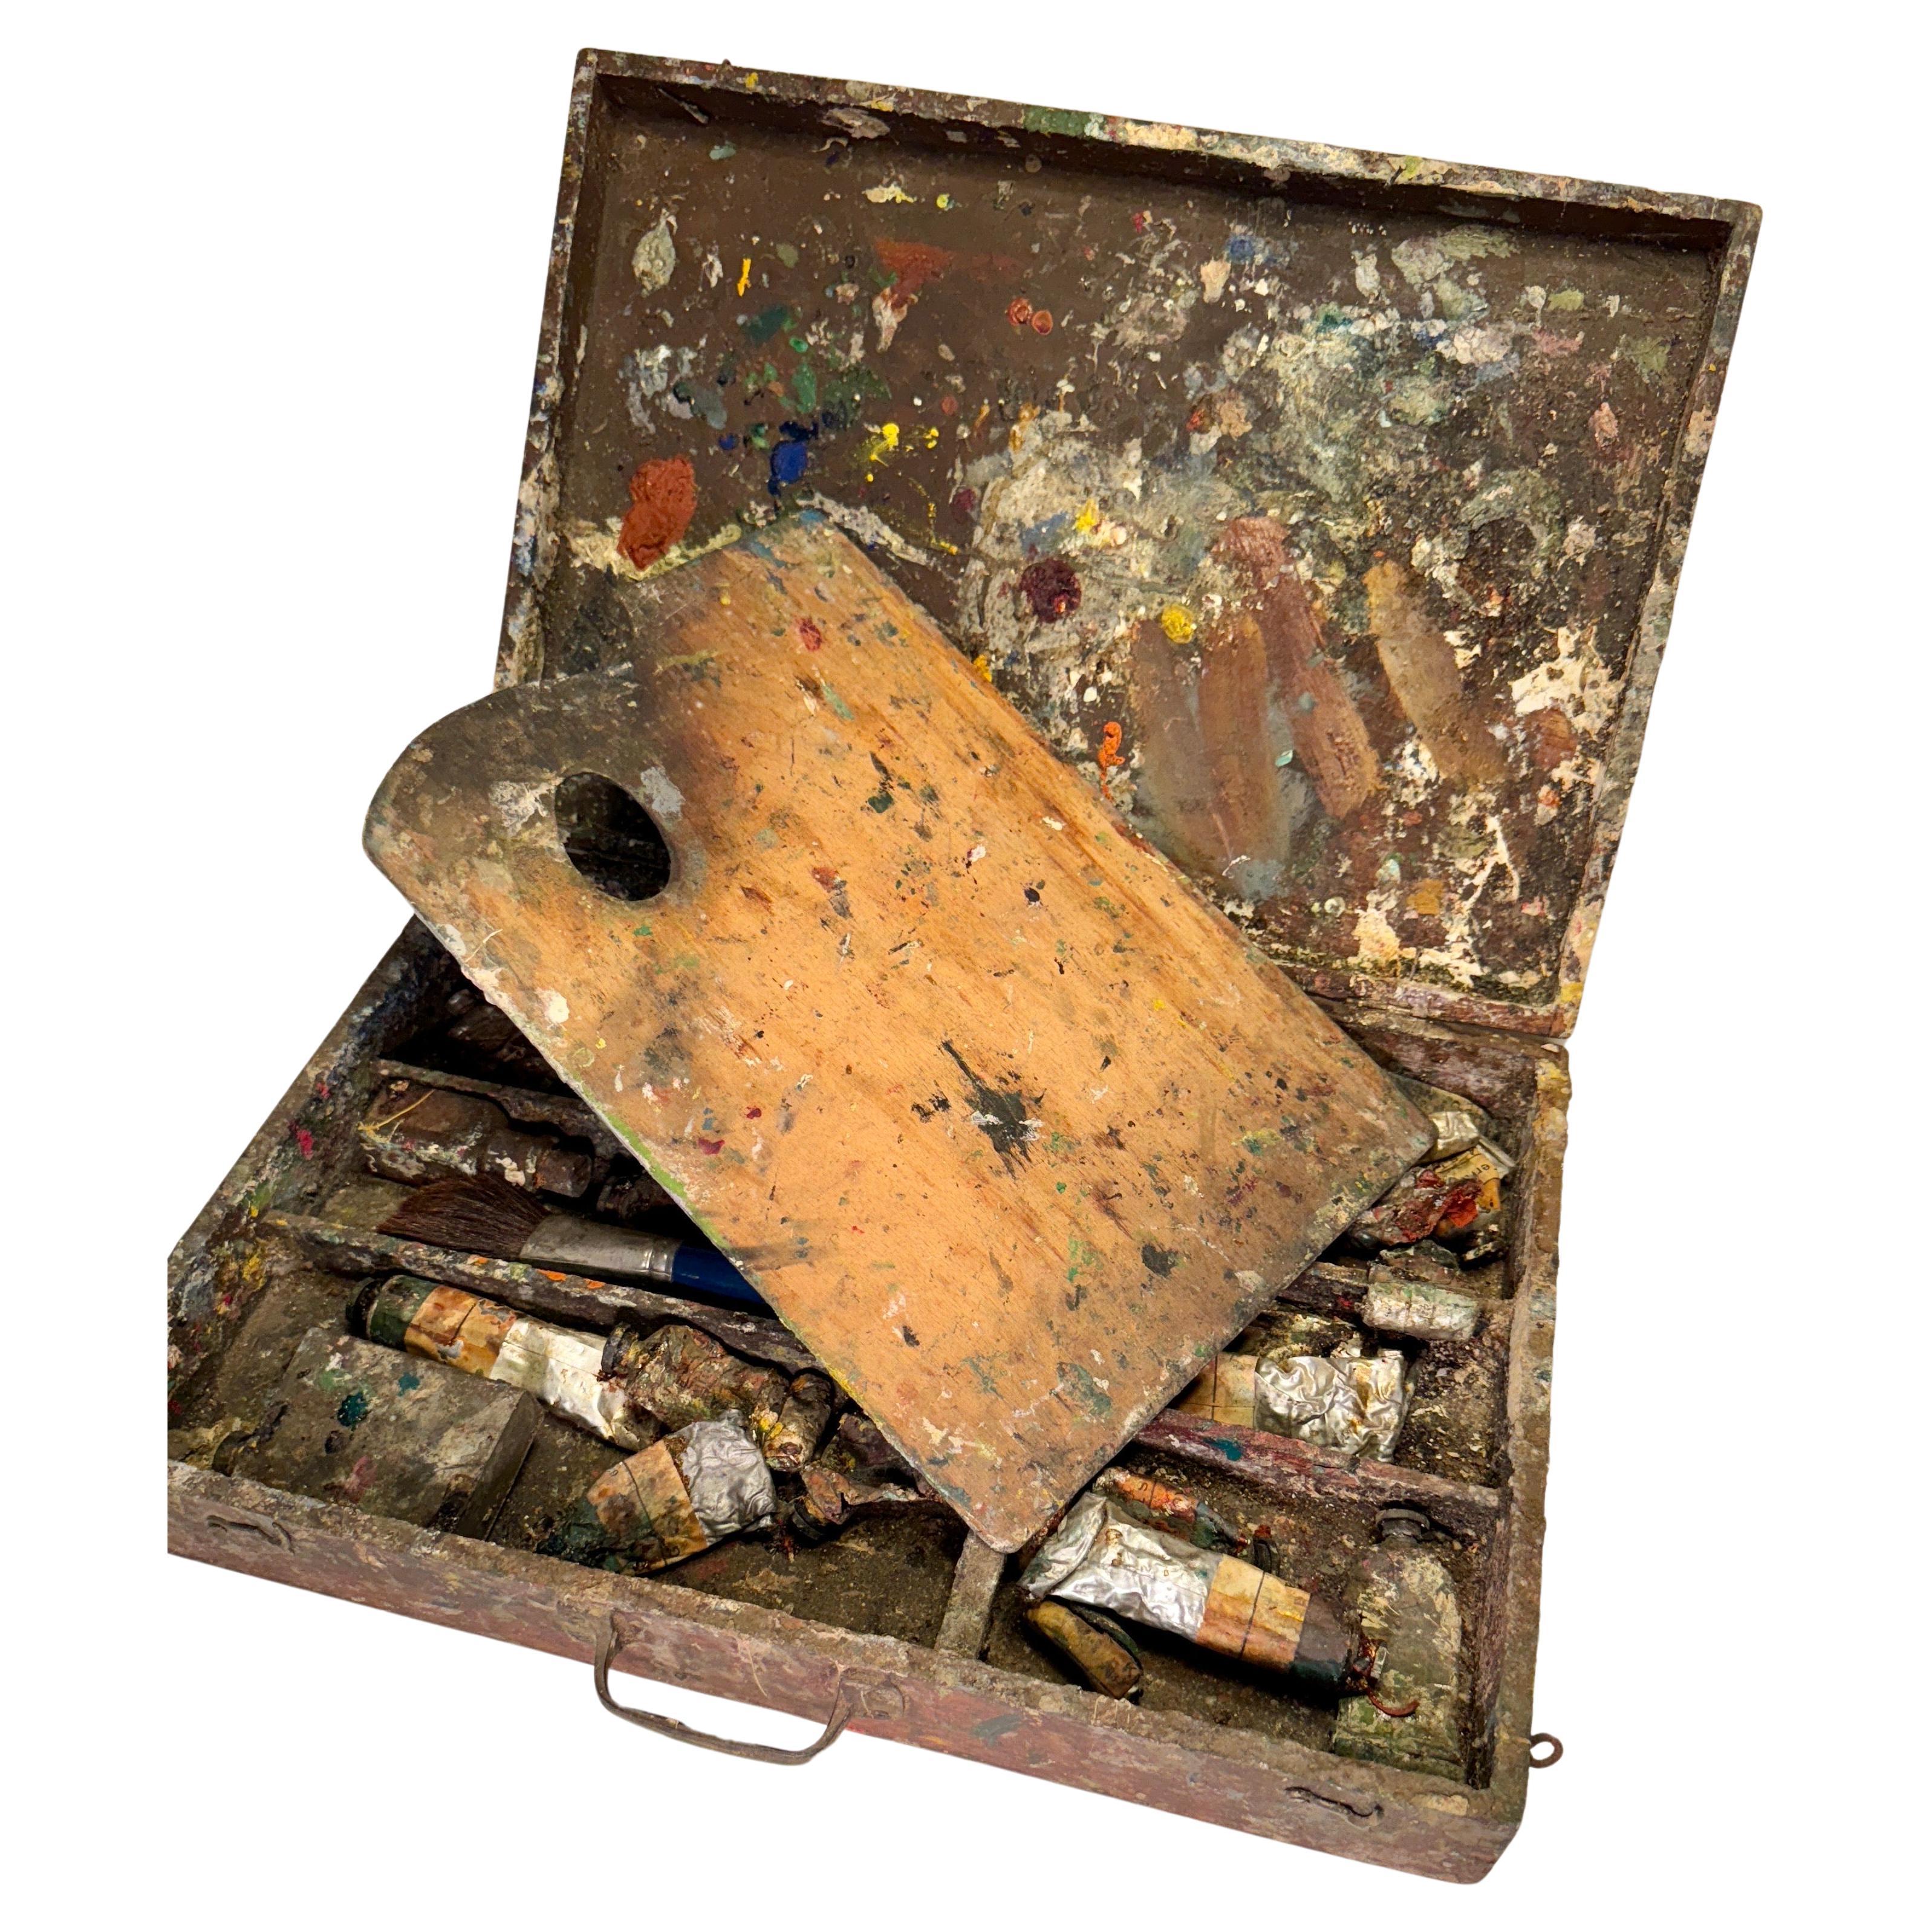 Danish Vintage Artists Paint Box and Pallet, Early 20th Century 

Well loved Danish artists traveling wooden box with everything needed to paint on location. This charming box, acquired directly from an artists studio in Jutland, features several